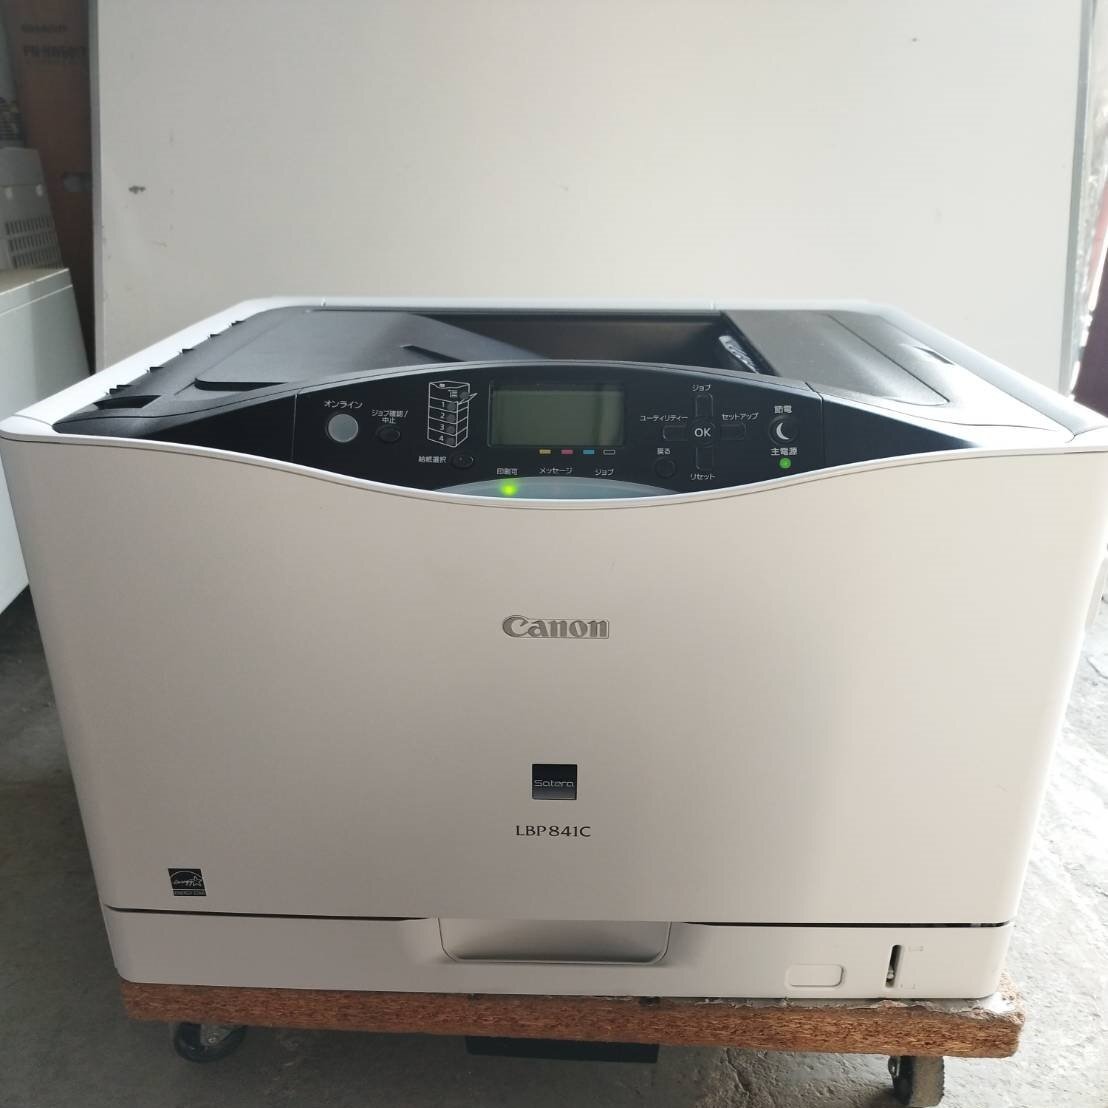 # special price!Canon LBP841C * seal character 69768 sheets * Canon A3 correspondence color laser printer both sides * seal character excellent *[D0329M10BH]